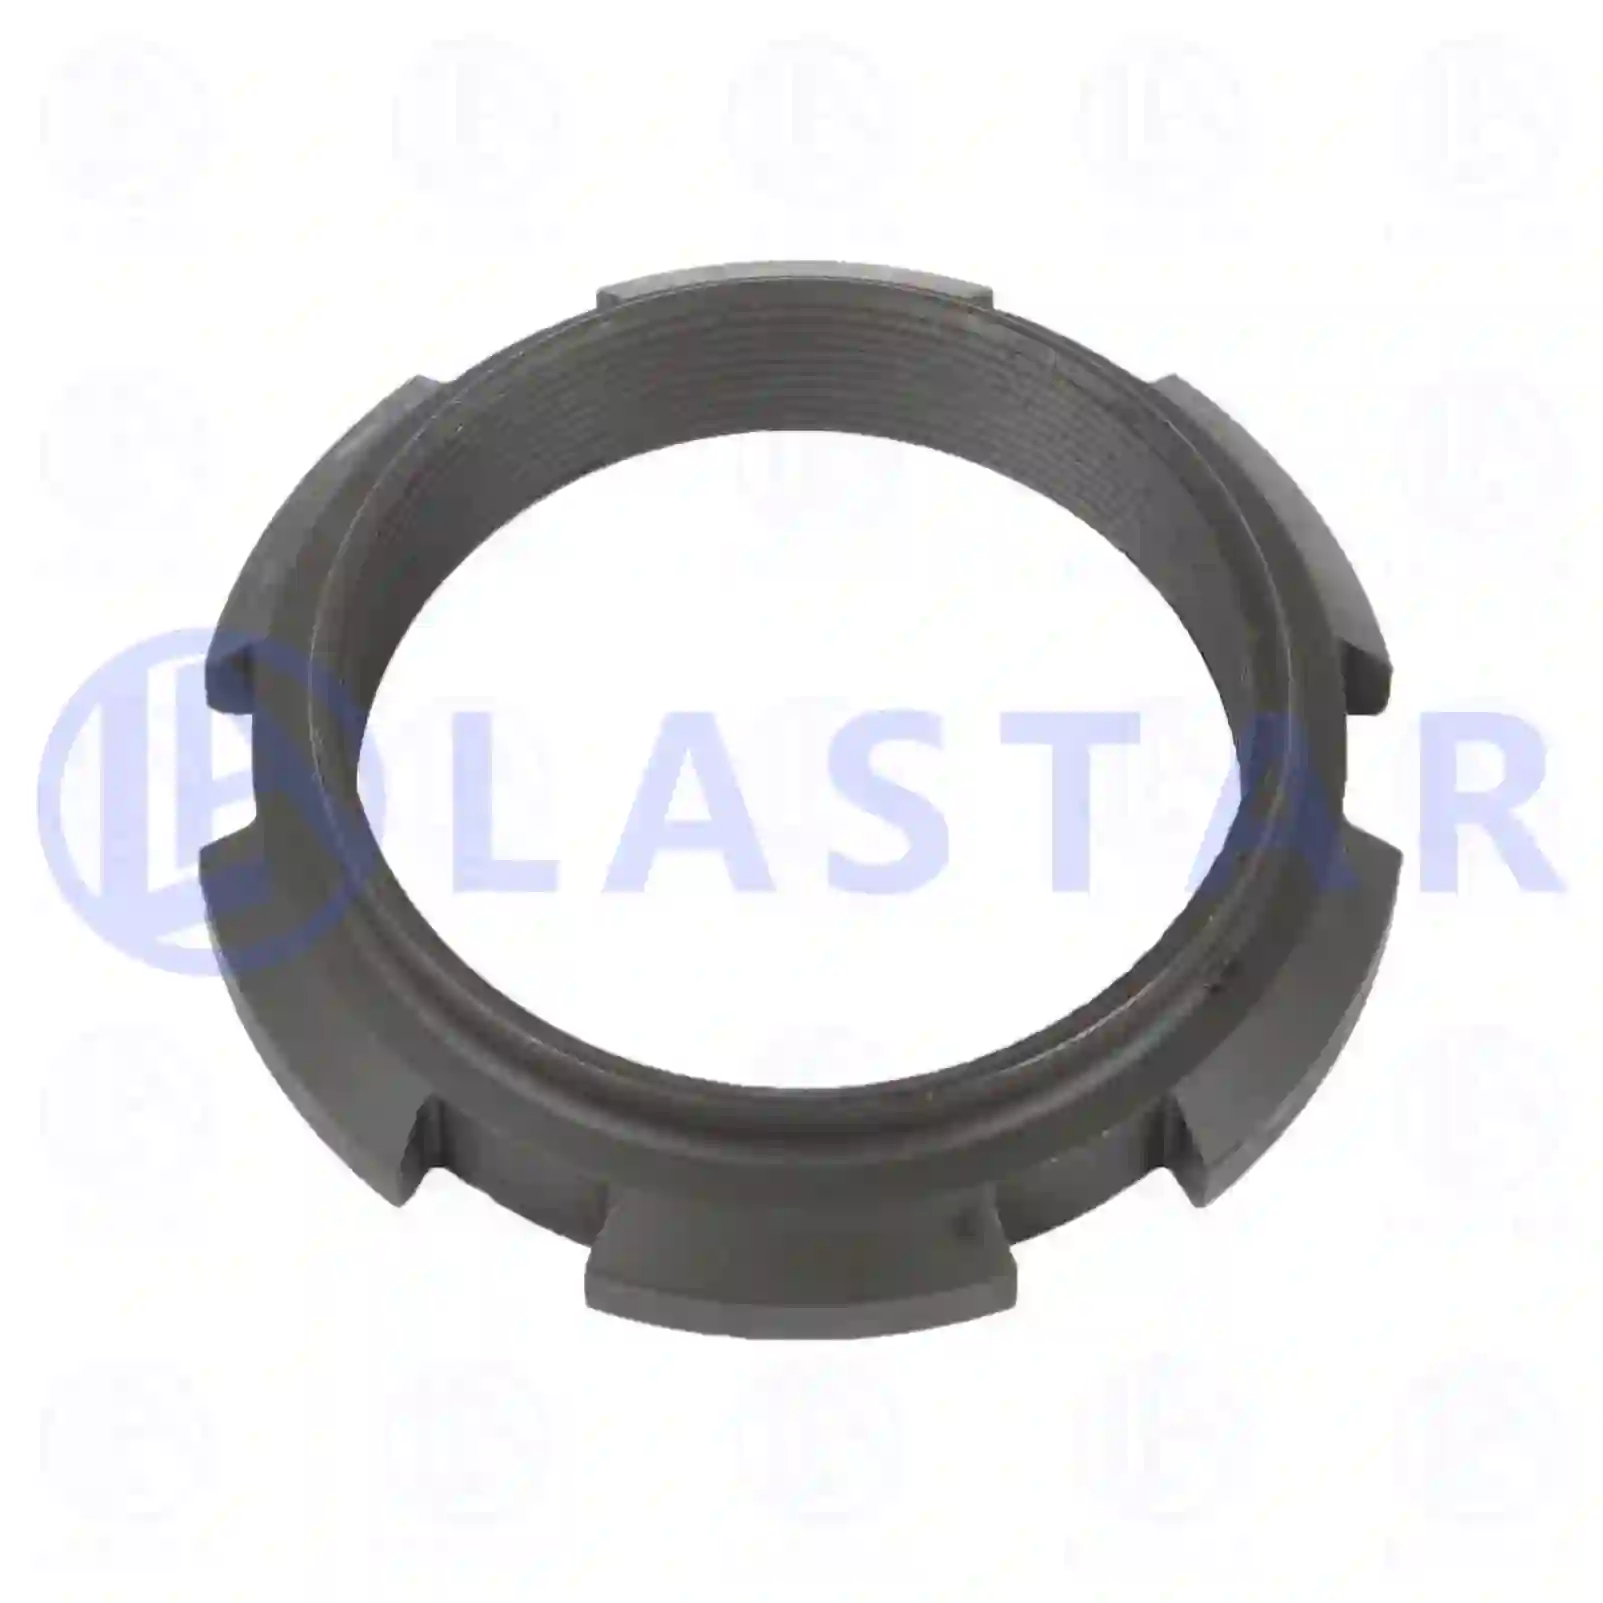 Grooved nut, 77730806, 81906200087, 3463 ||  77730806 Lastar Spare Part | Truck Spare Parts, Auotomotive Spare Parts Grooved nut, 77730806, 81906200087, 3463 ||  77730806 Lastar Spare Part | Truck Spare Parts, Auotomotive Spare Parts